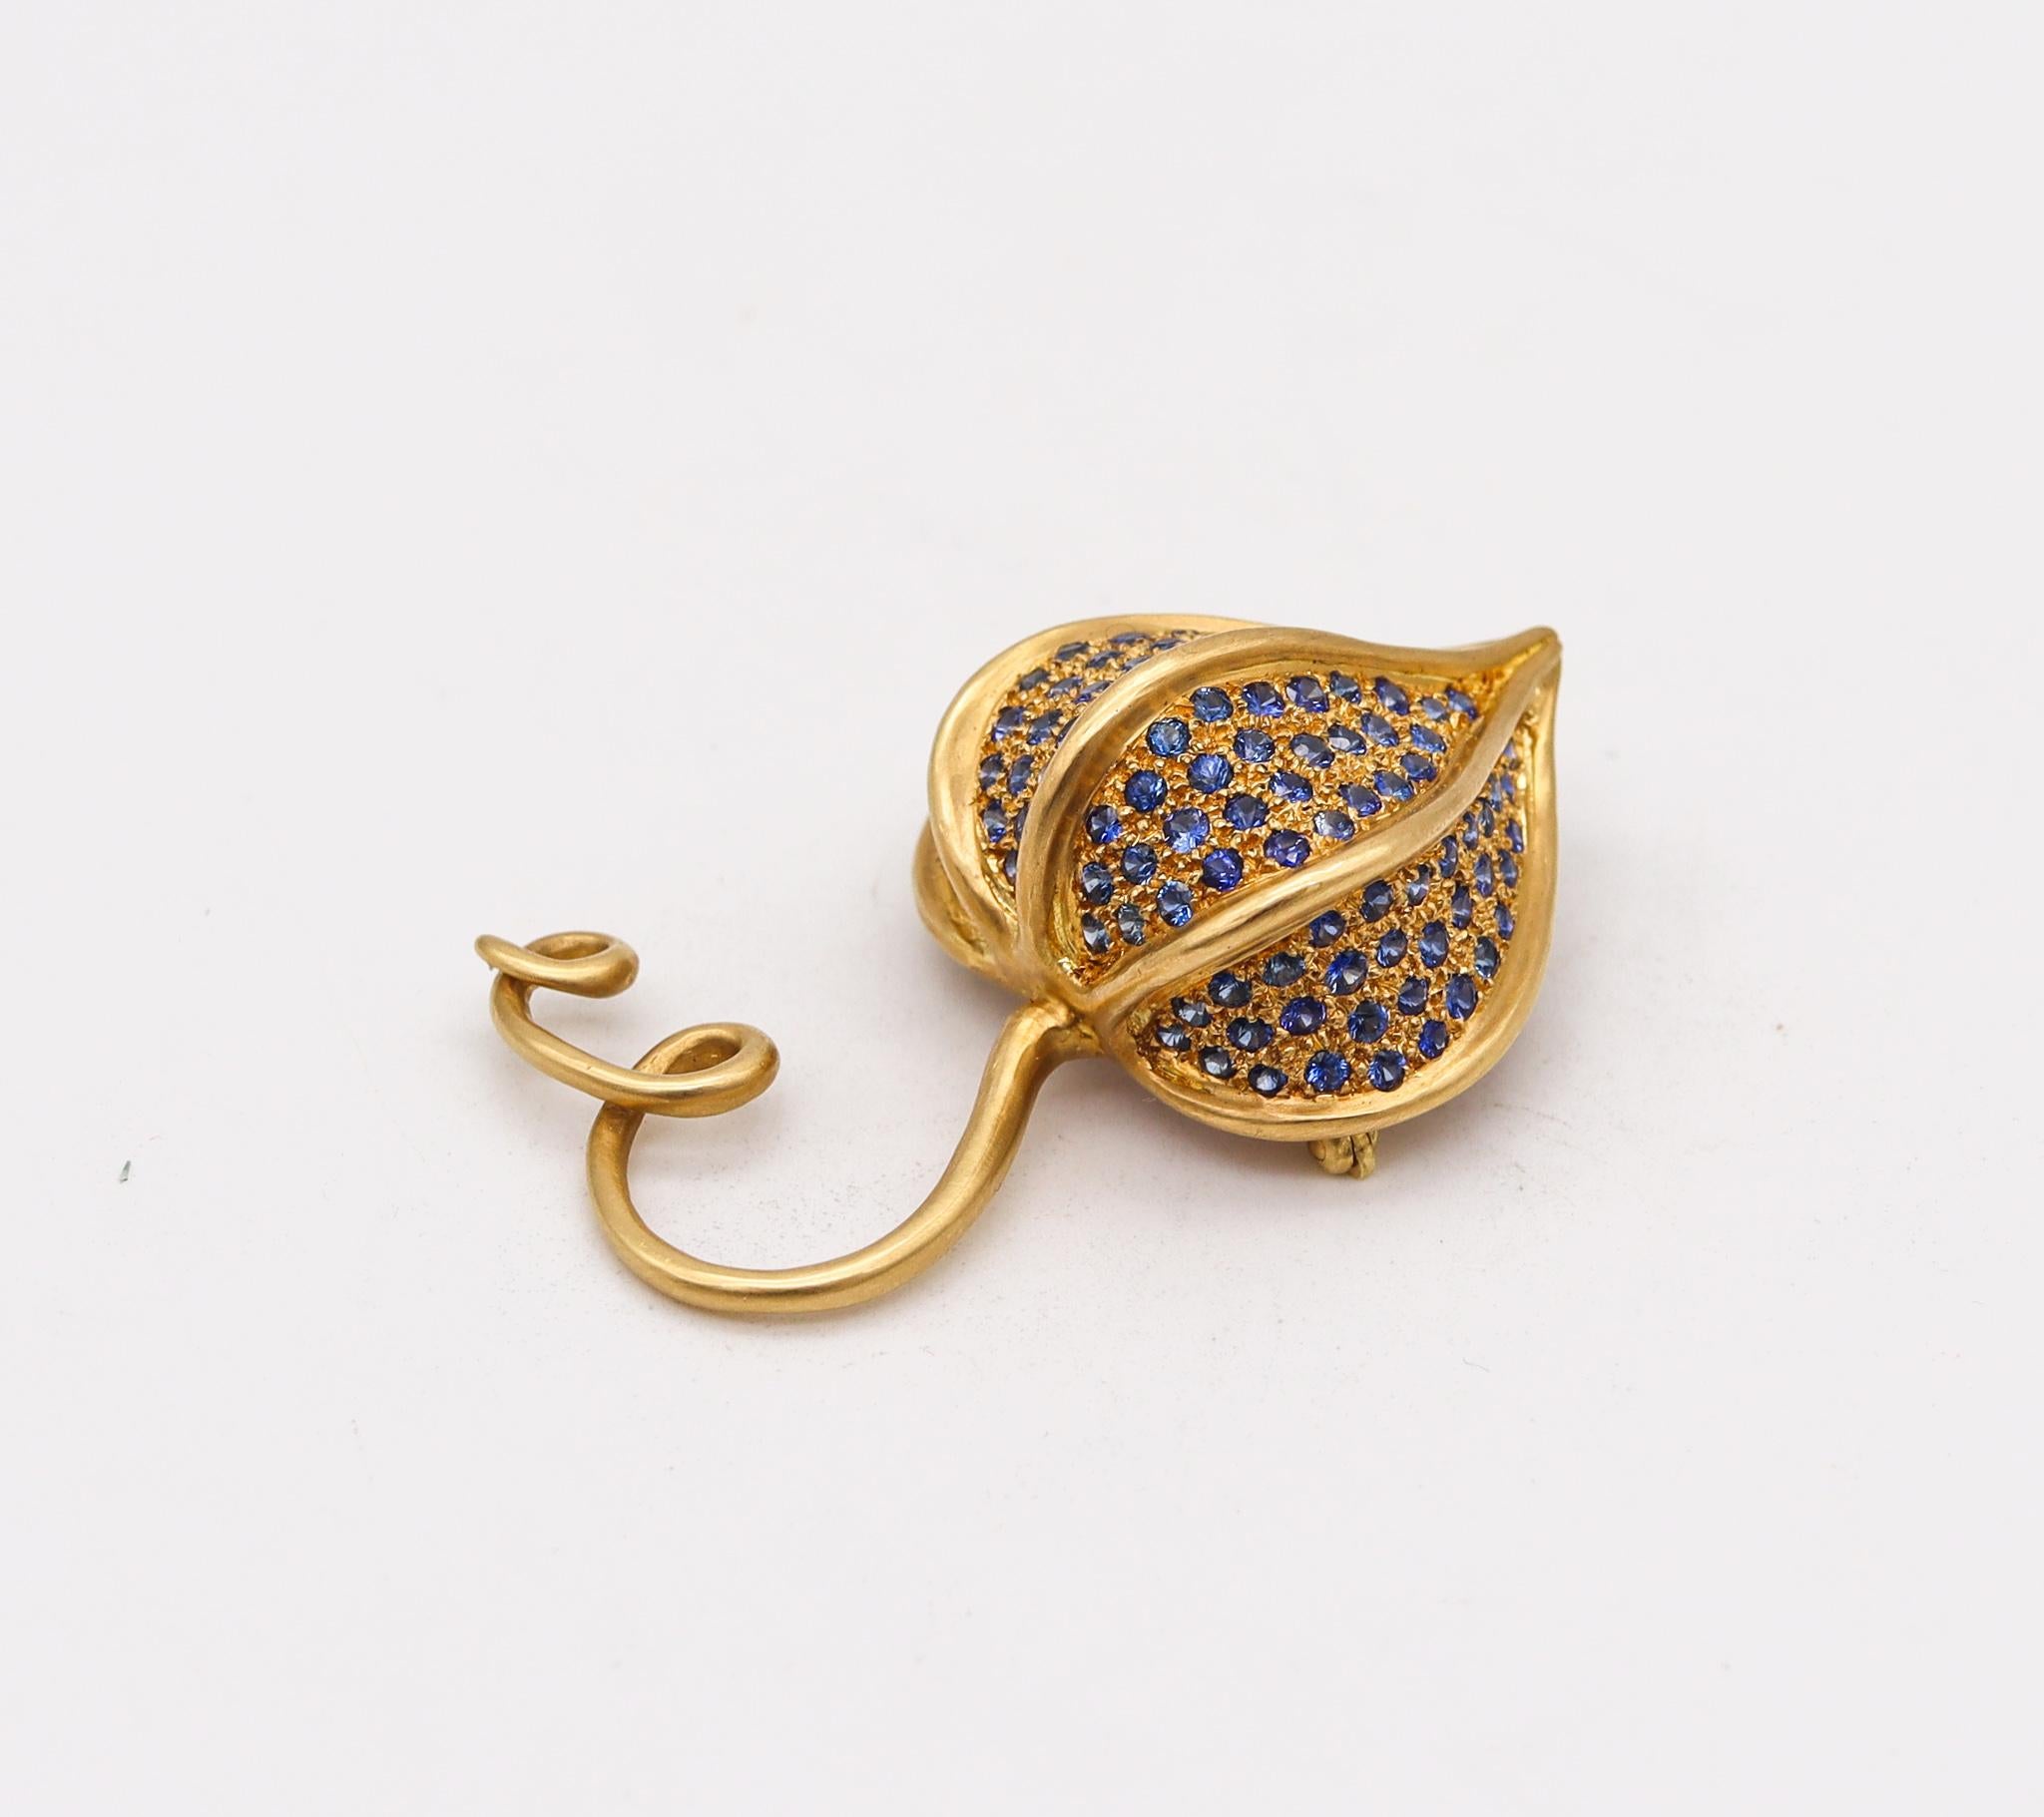 Modern Angela Cummings 1997 Brooch in 18kt Yellow Gold with 3.76ctw in Blue Sapphires